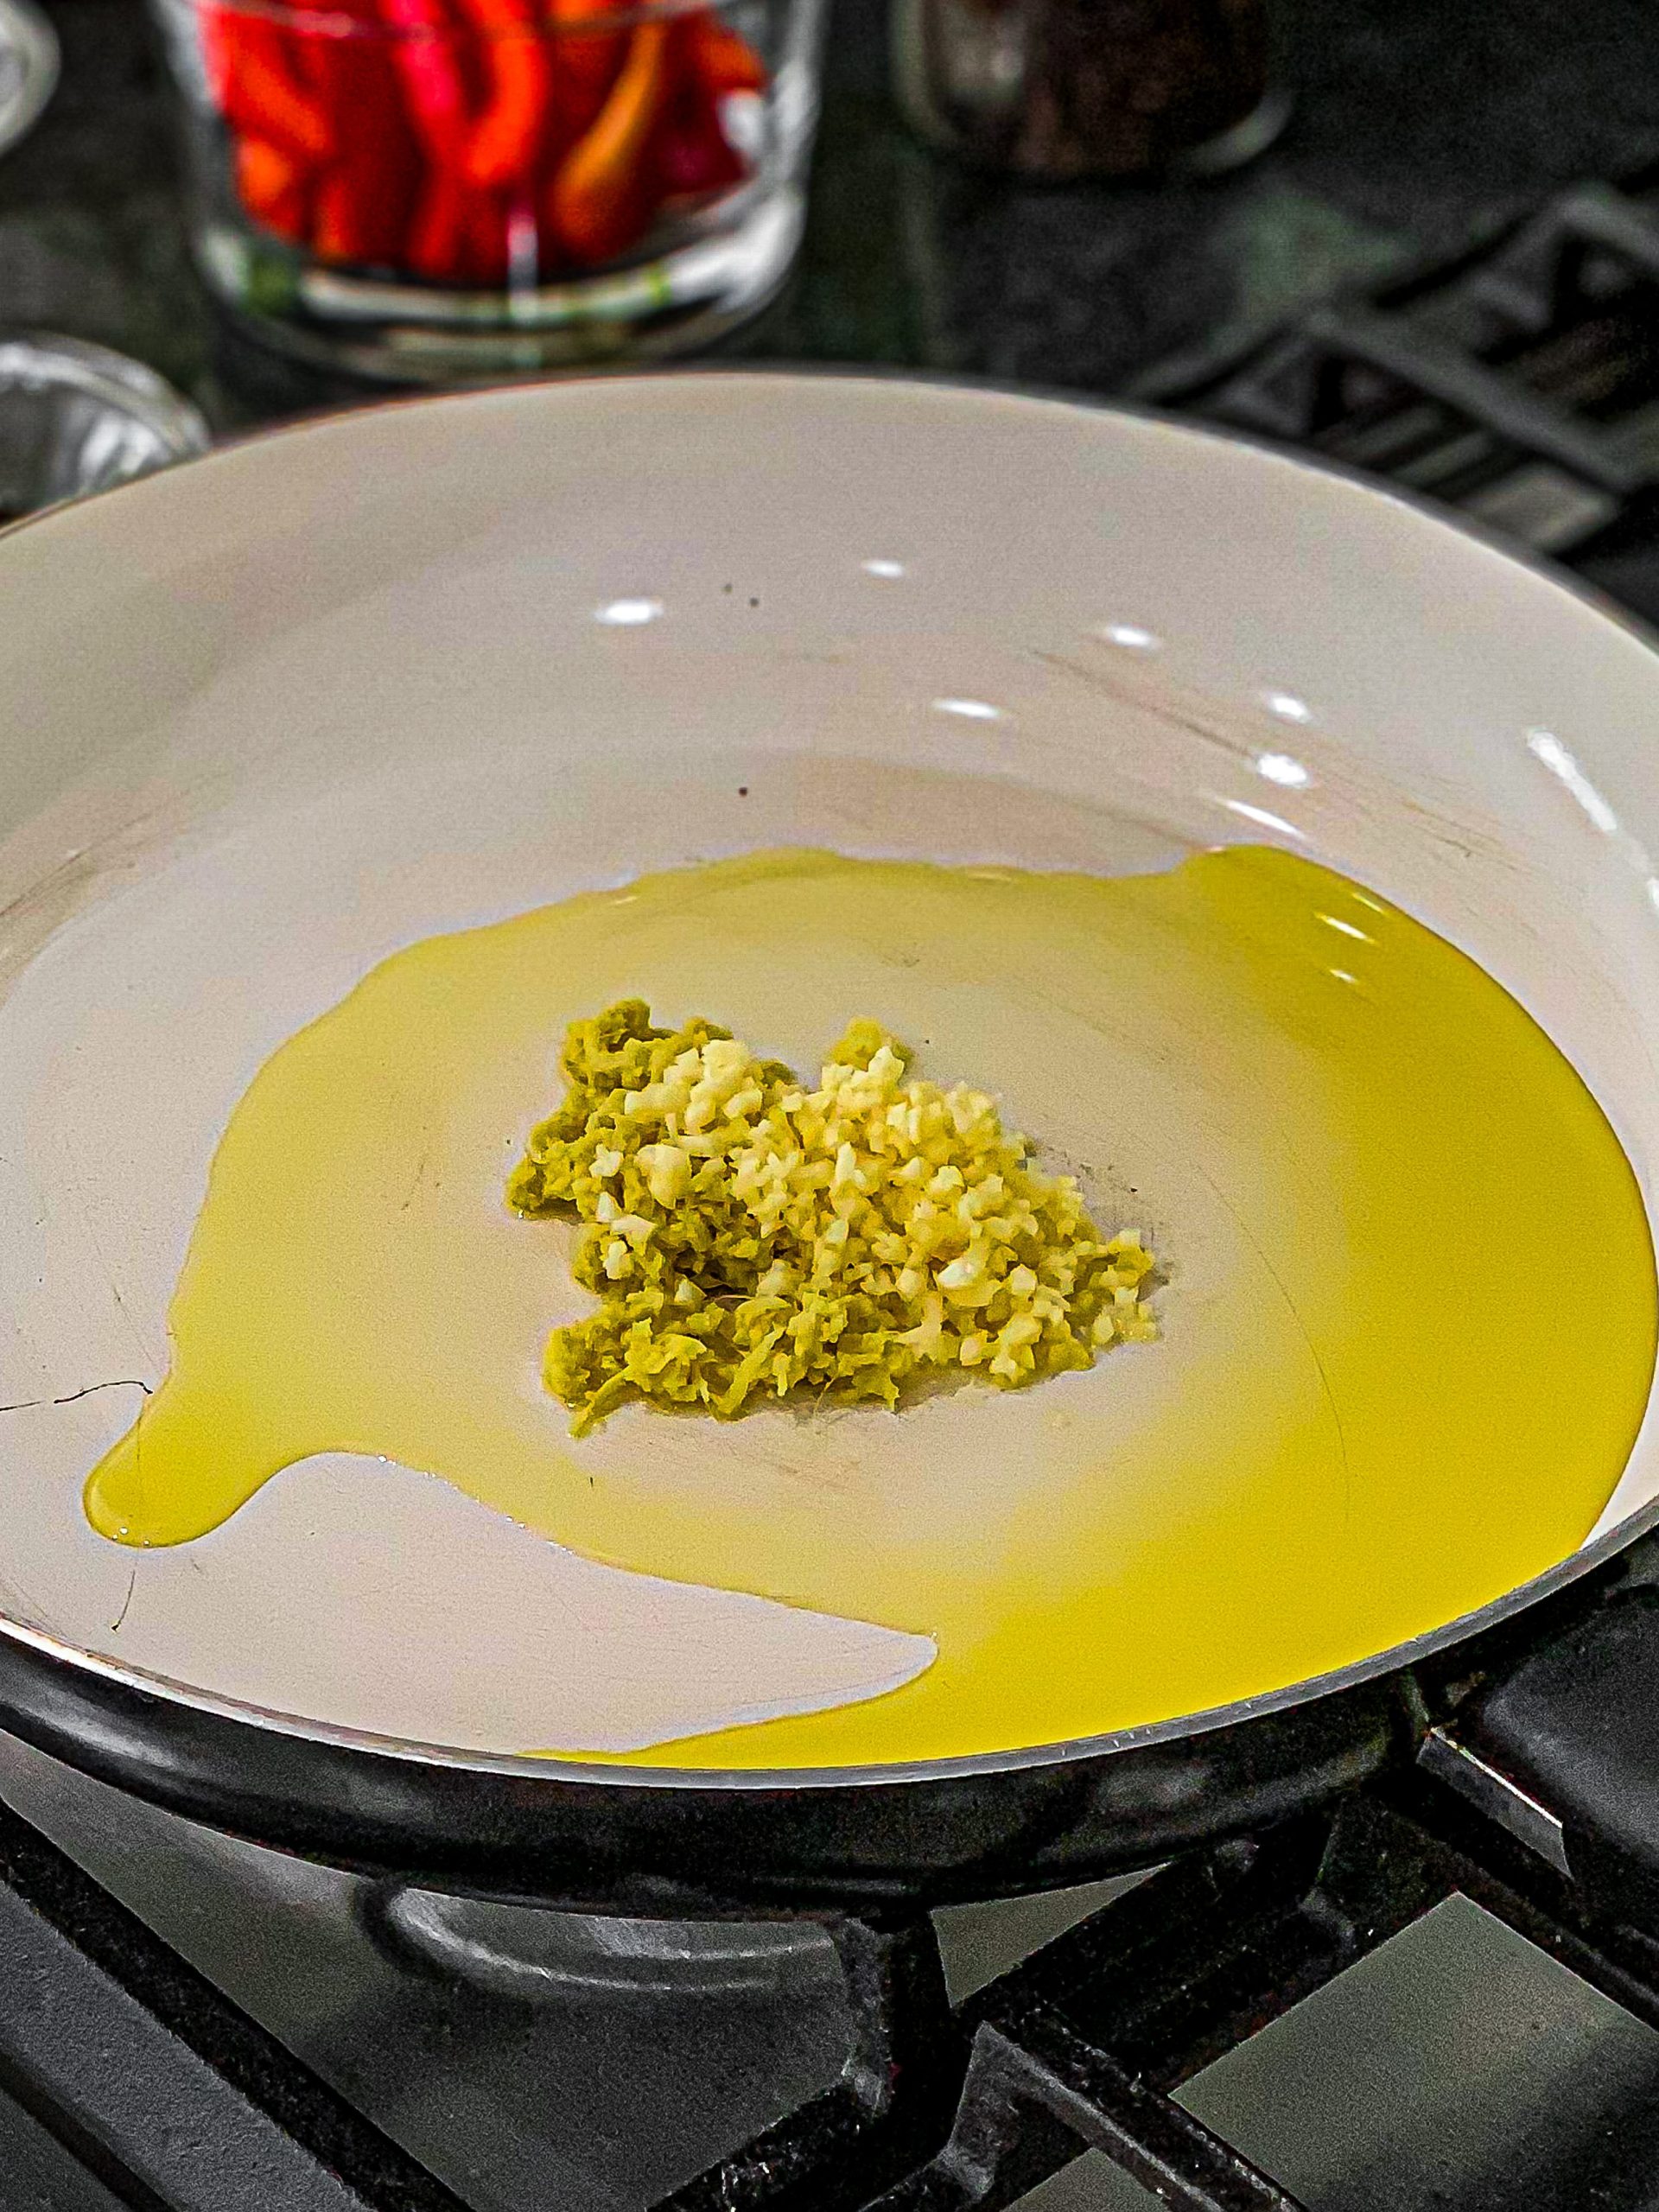 In a large skillet add olive oil and heat to medium-low. Add the garlic and ginger and cook for 30 seconds or until garlic is golden.